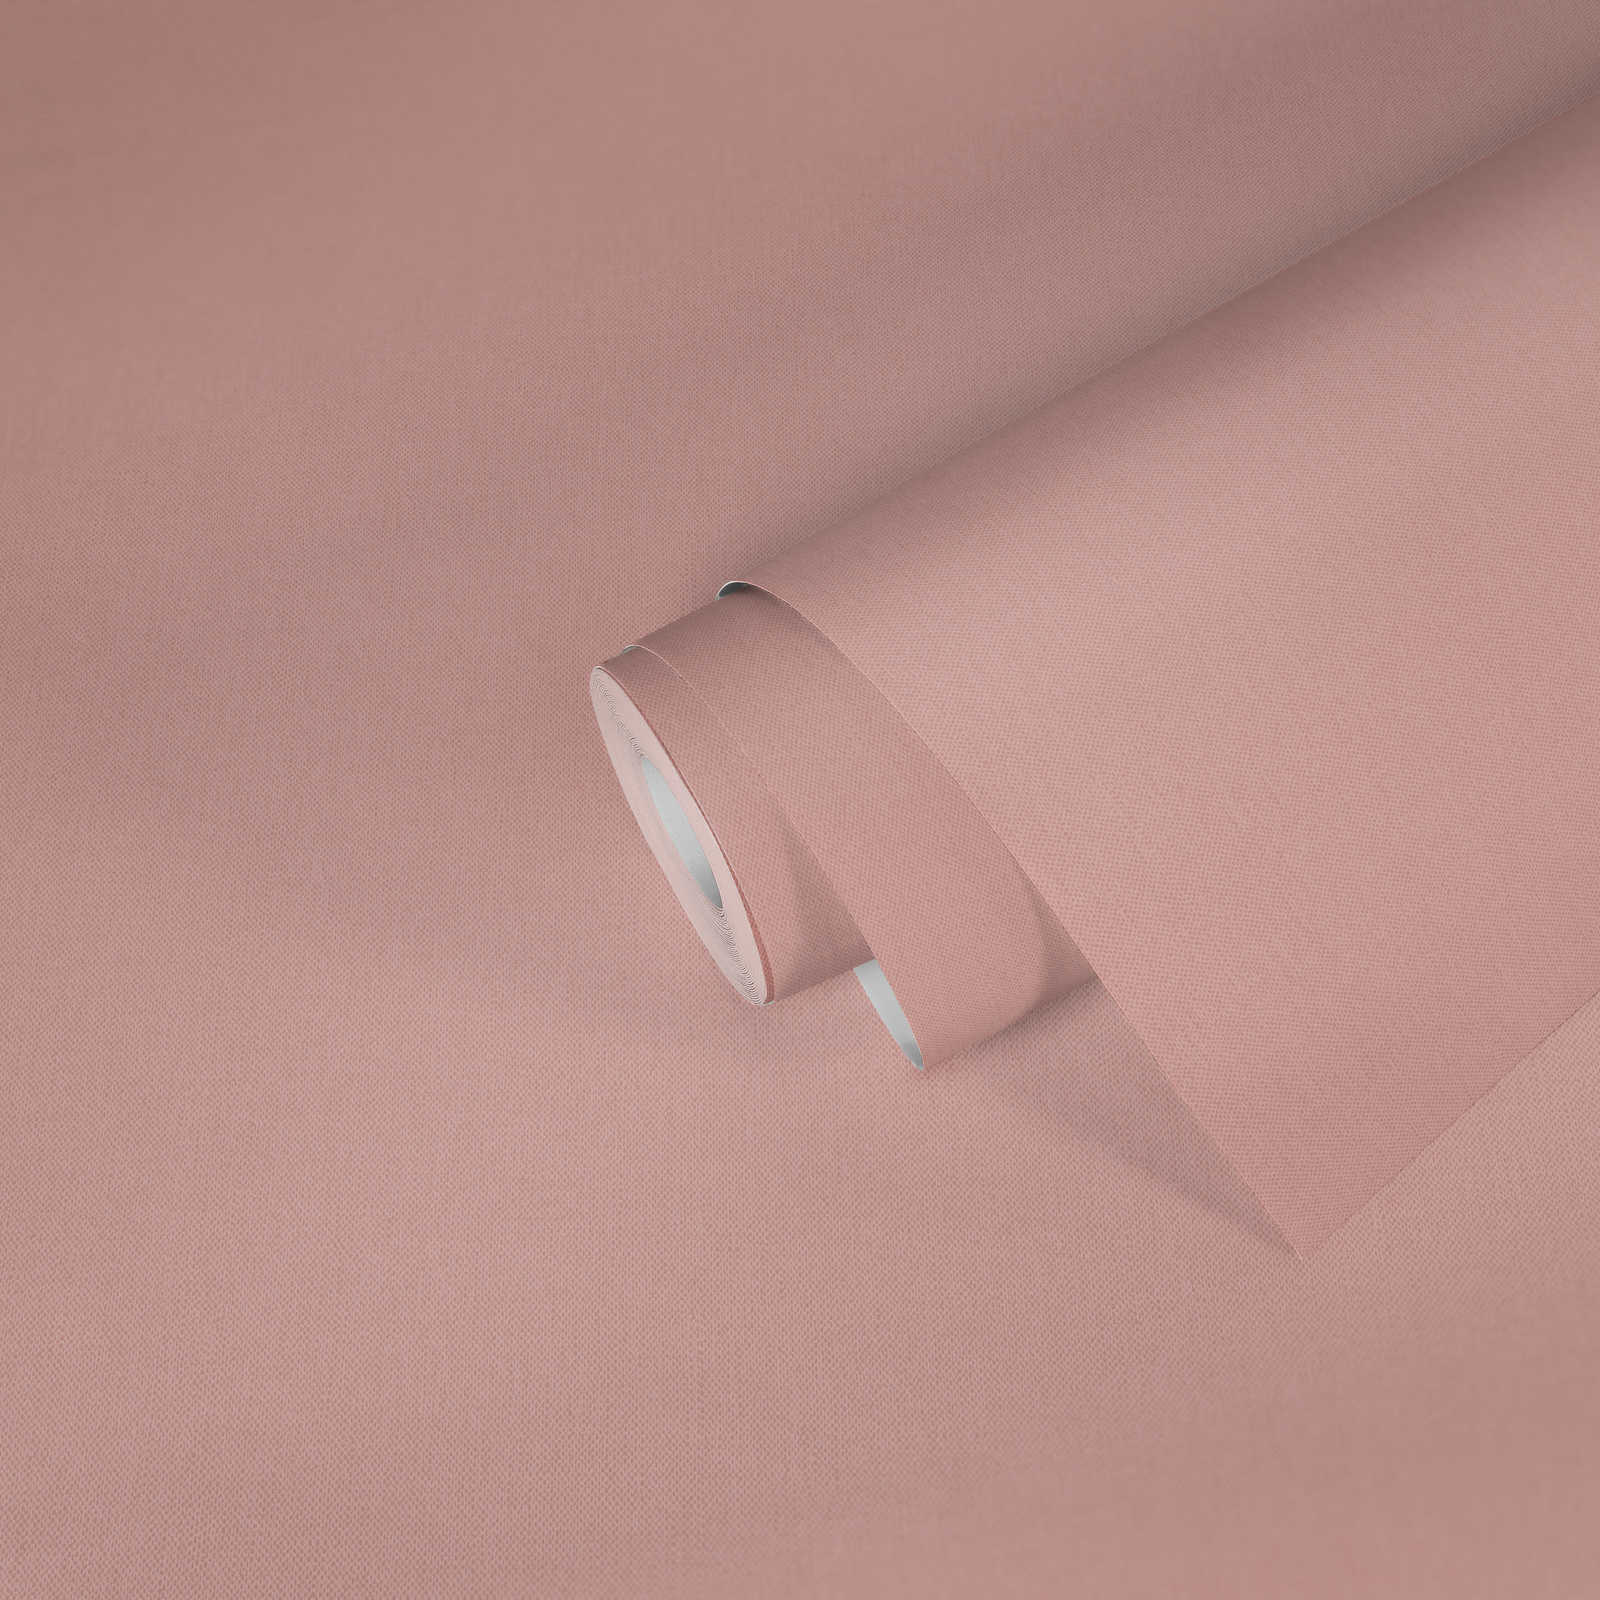             Wallpaper pastel pink with linen texture & textile look - pink
        